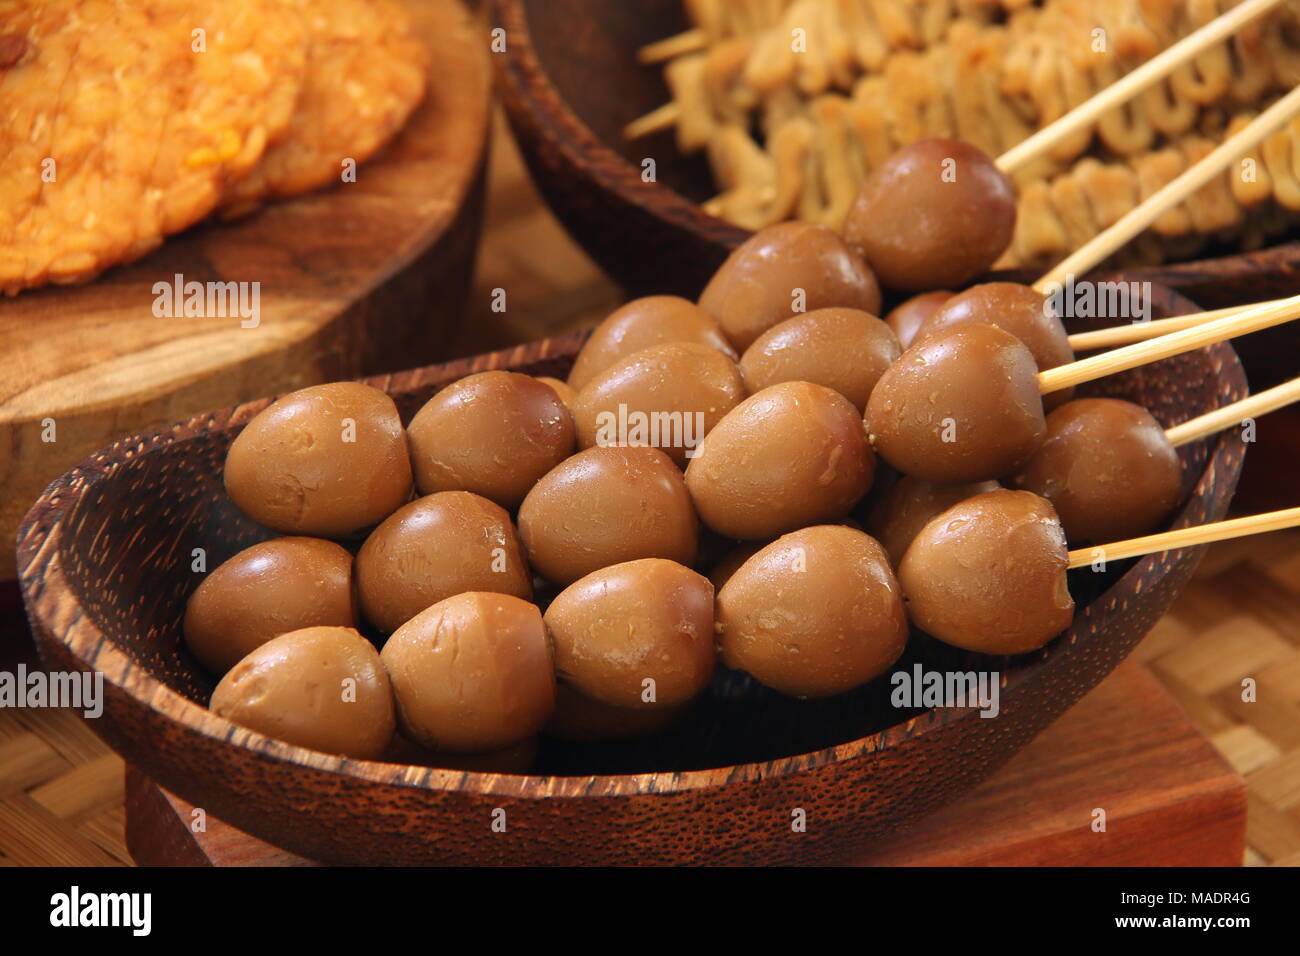 Sate Telur Puyuh, a Javanese traditional dish of braised quail egg satays; commonly served with Javanese soup dish. Stock Photo